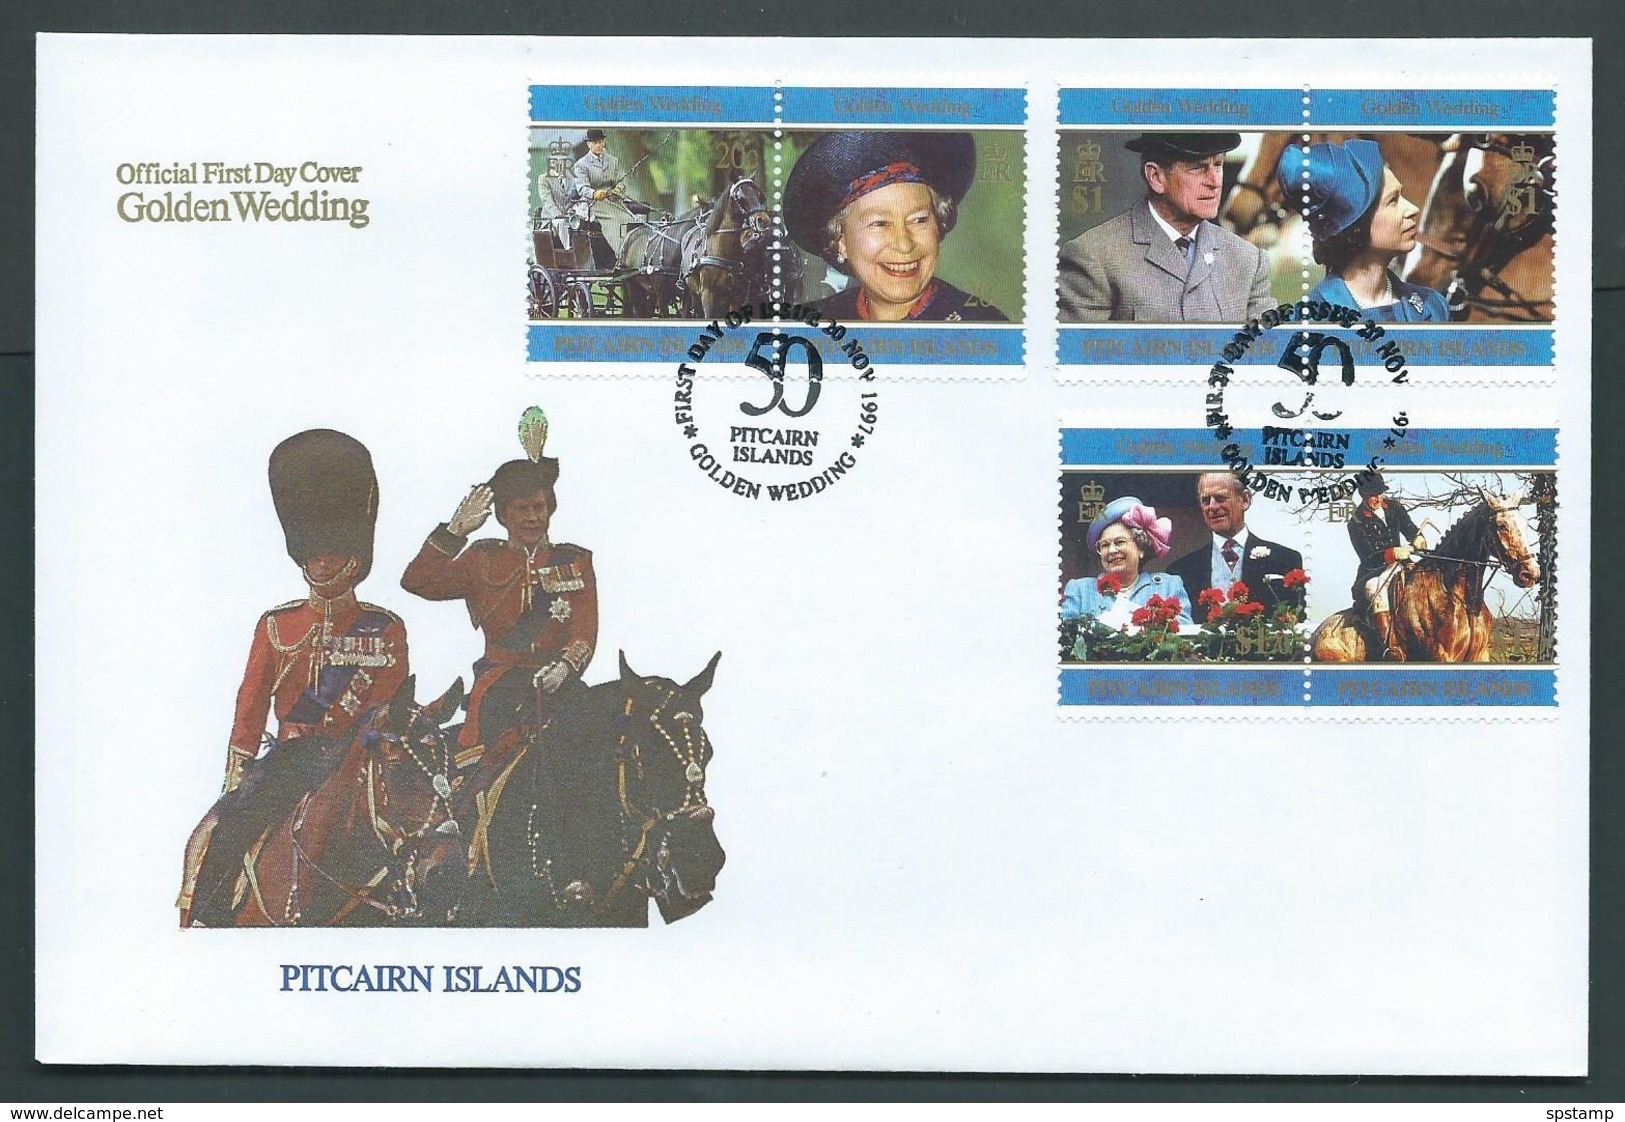 Pitcairn Islands 1997 QEII Golden Wedding Anniversary Set Of 3 Pairs On FDC Official Unaddressed - Pitcairn Islands